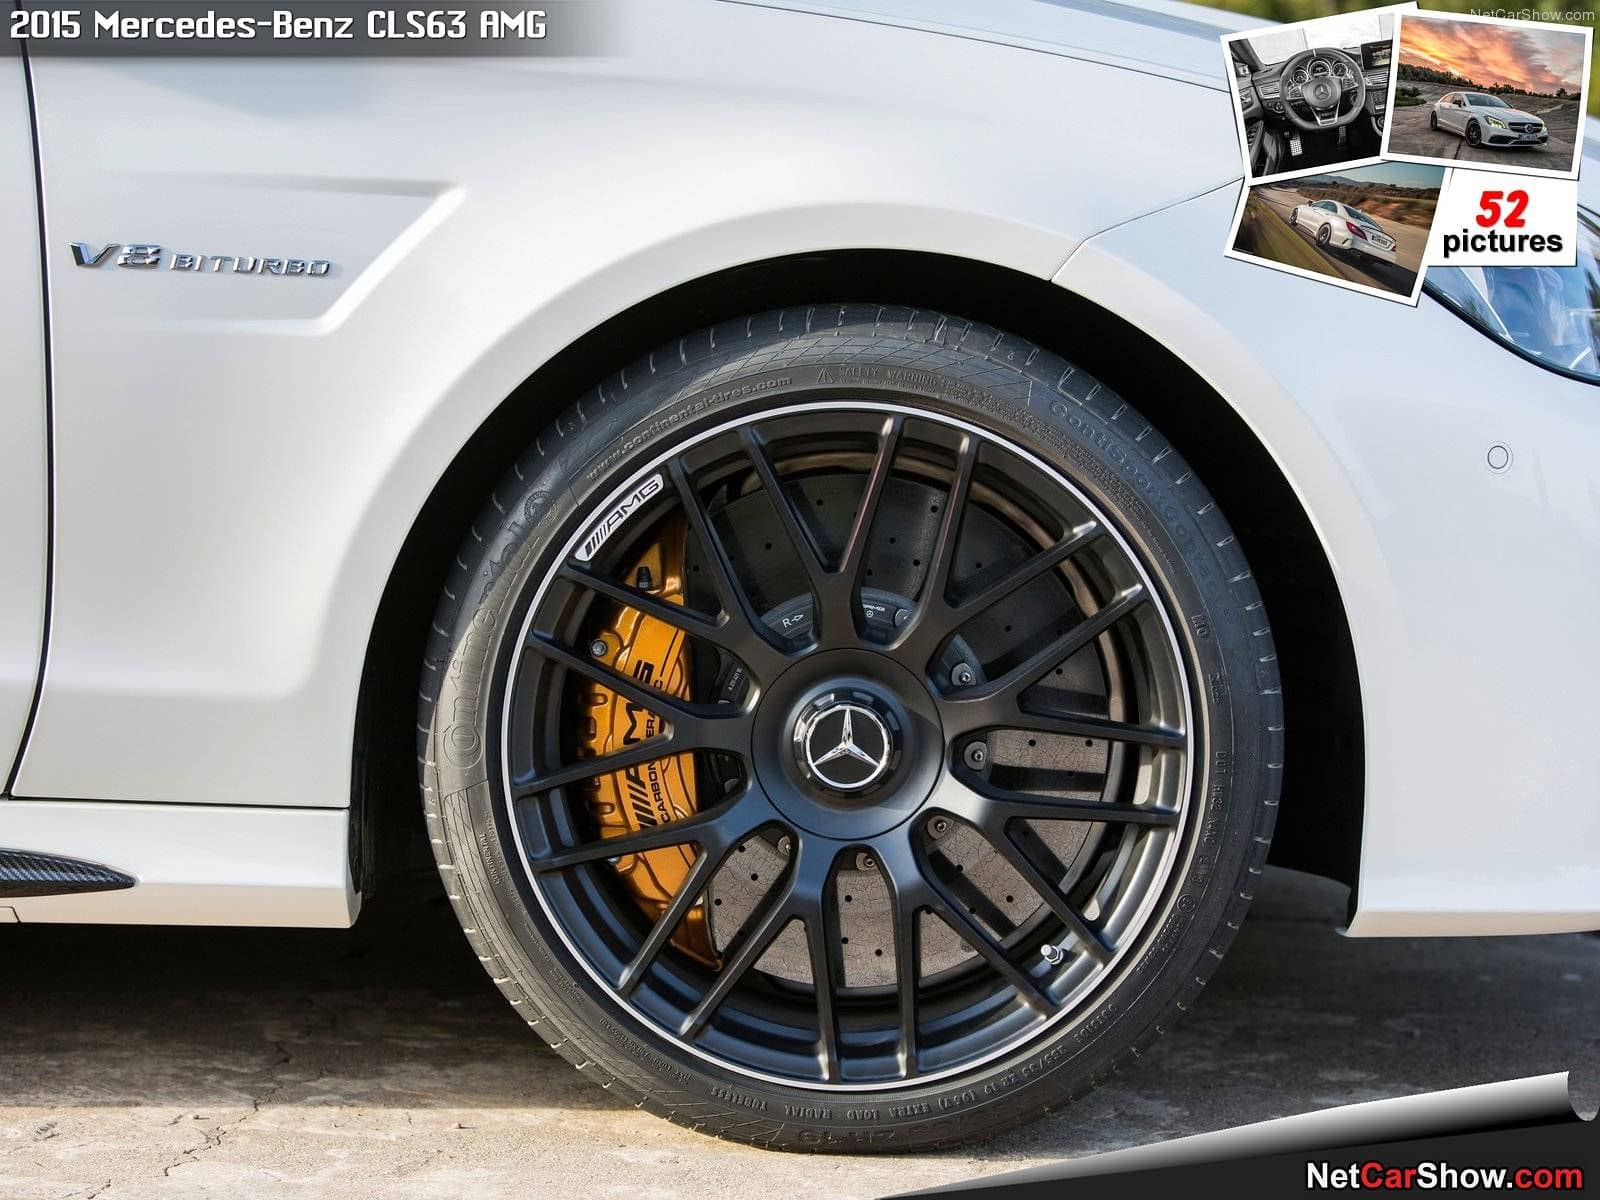 Wheels and Tires/Axles - Wanted 19" or 20" Black AMG Wheels and Tires (Set of 4) - New or Used - 2011 to 2018 Mercedes-Benz CLS550 - Dallas, TX 75201, United States